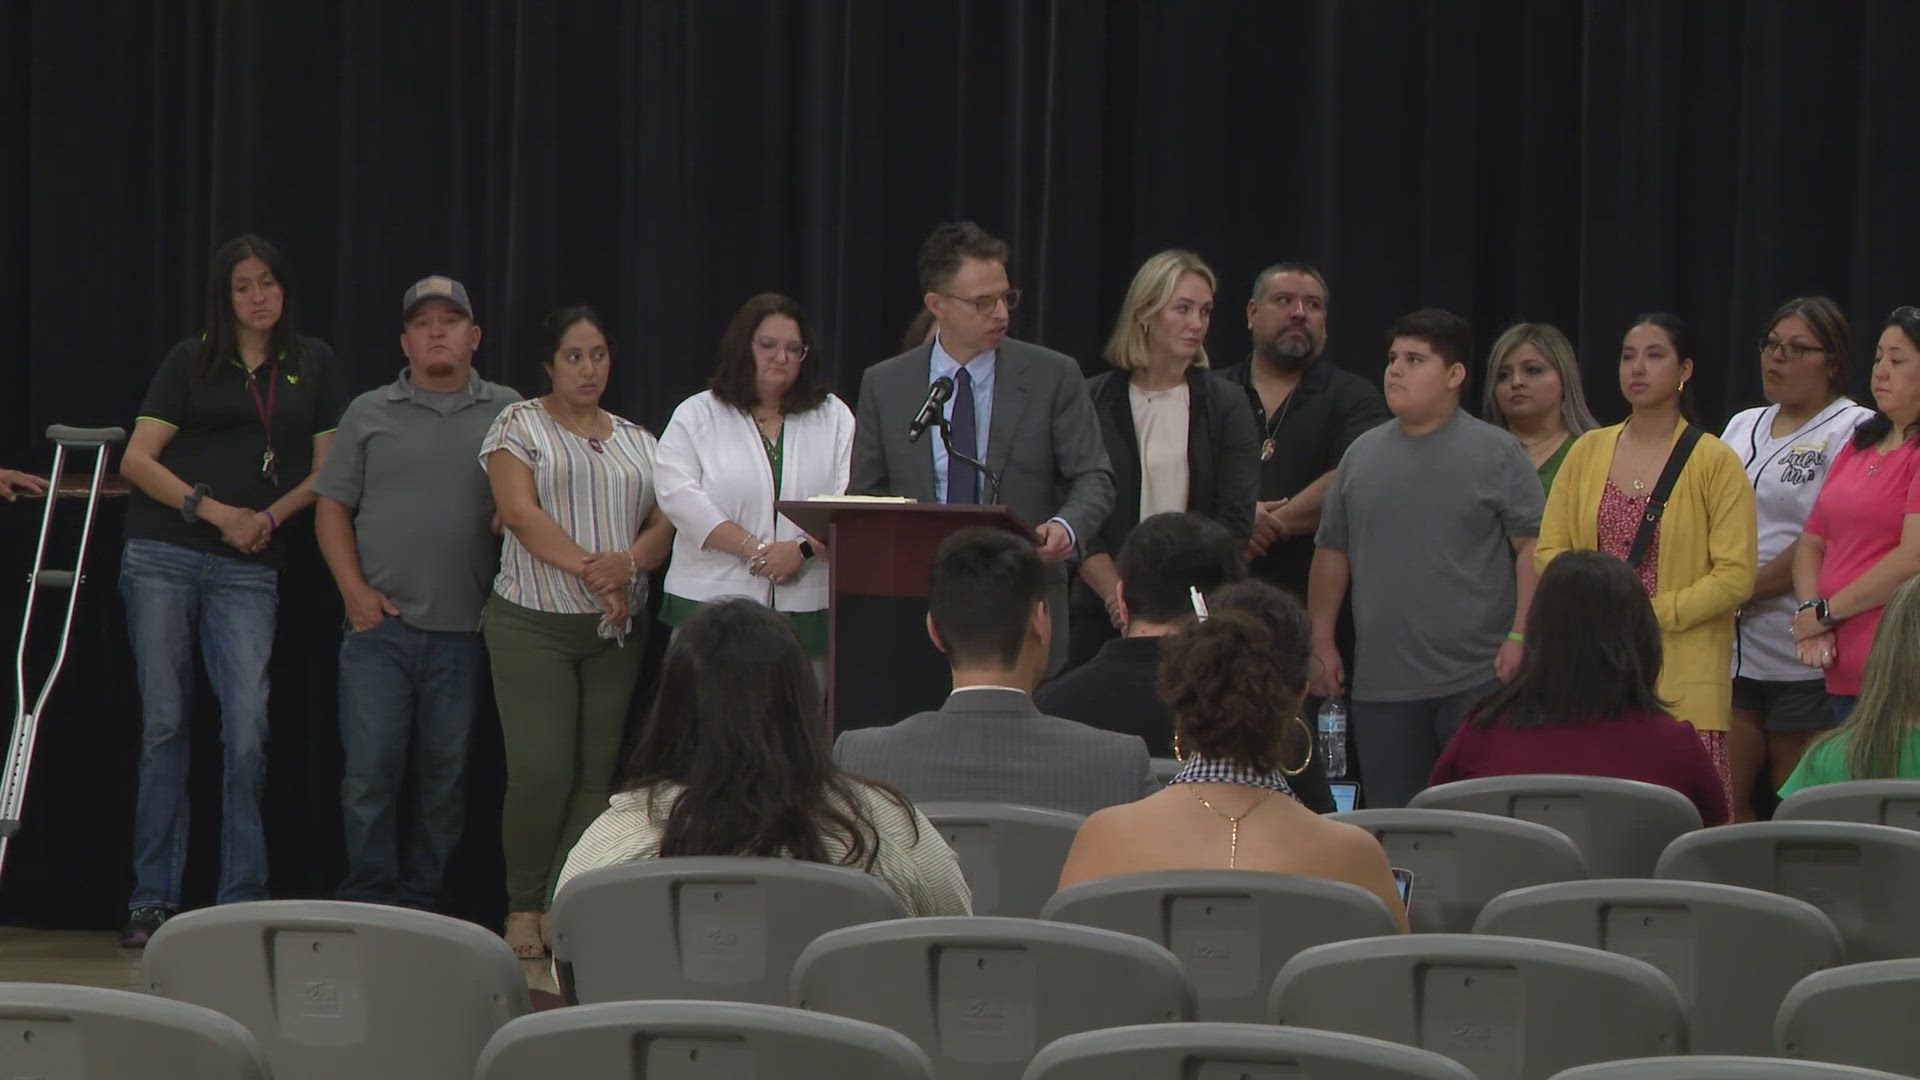 Along with the $500M lawsuit, families also announced a $2M settlement with the City of Uvalde. The city promised higher standards and better training for officers.